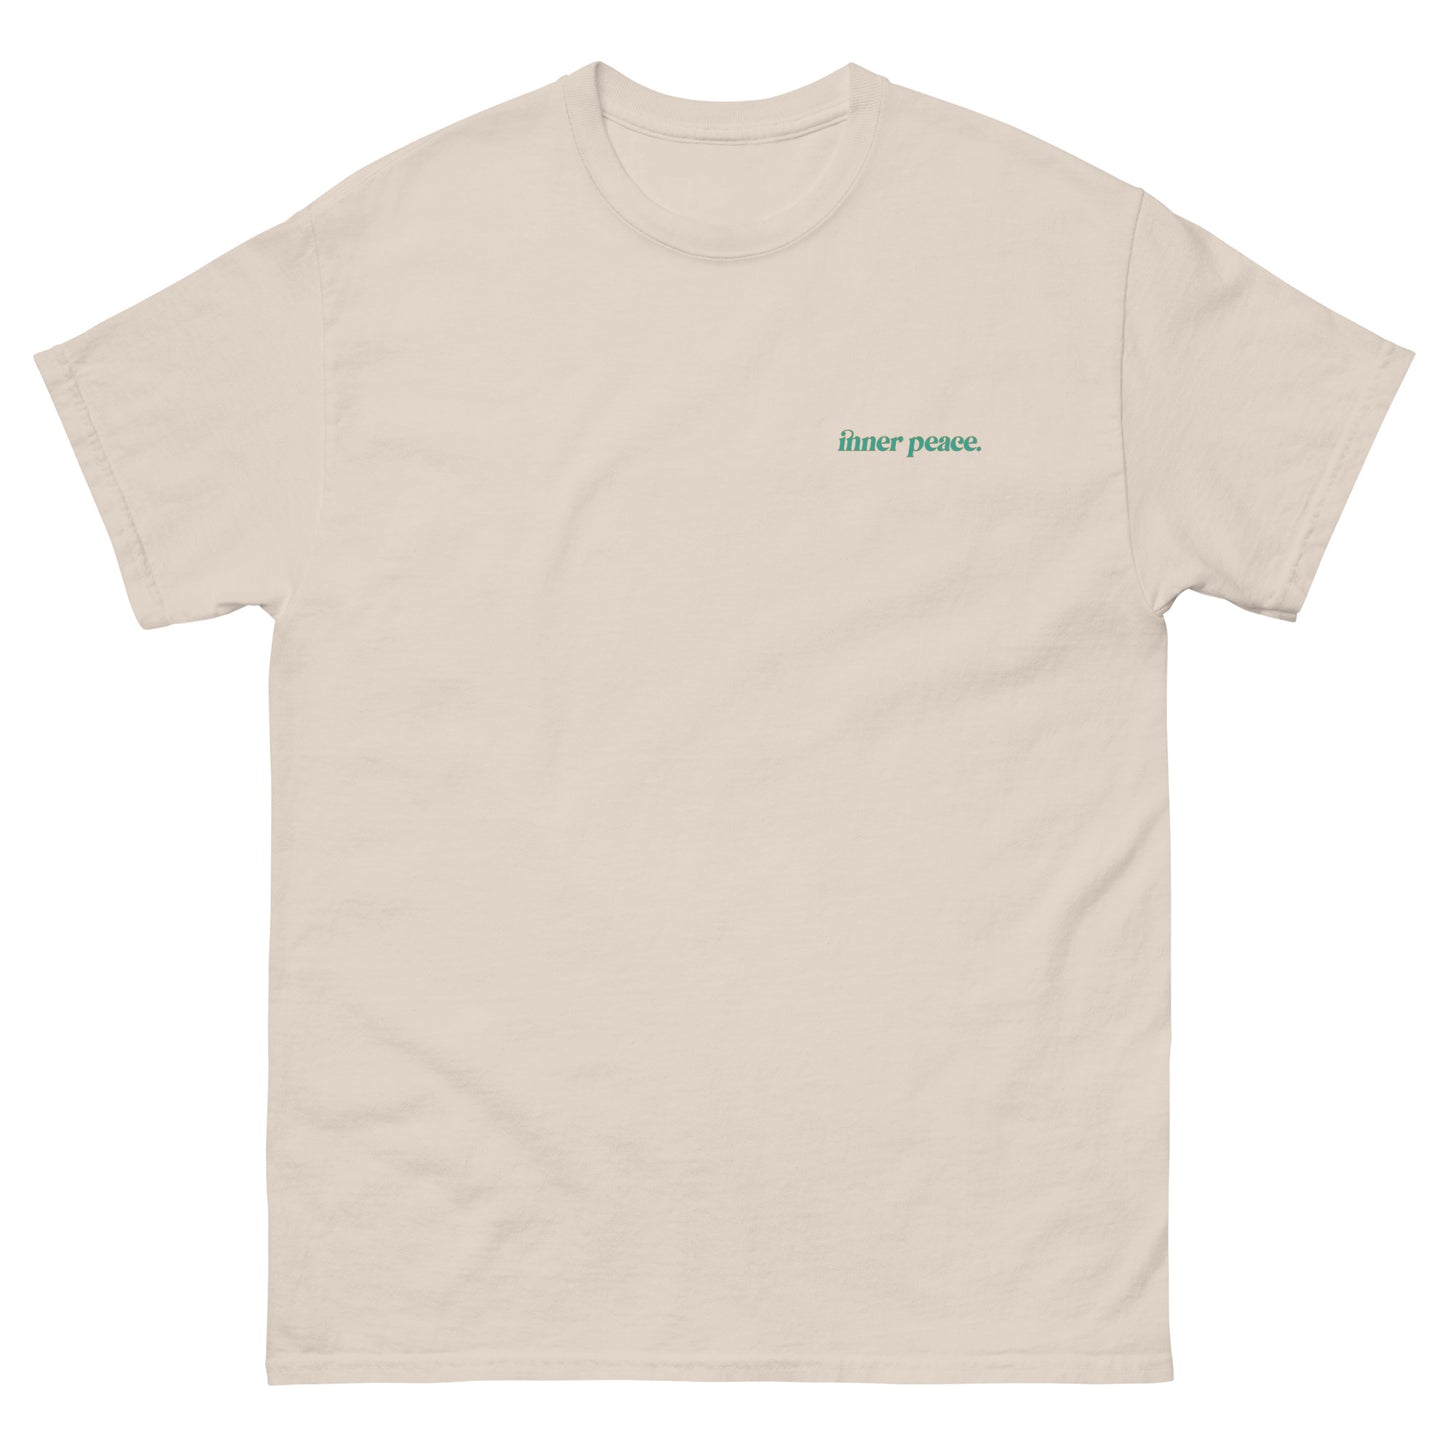 Beige High Quality Tee - Front Design with "inner peace " print on left chest - Back Design with a Phrase "You know what's the real luxury? Your inner peace." print